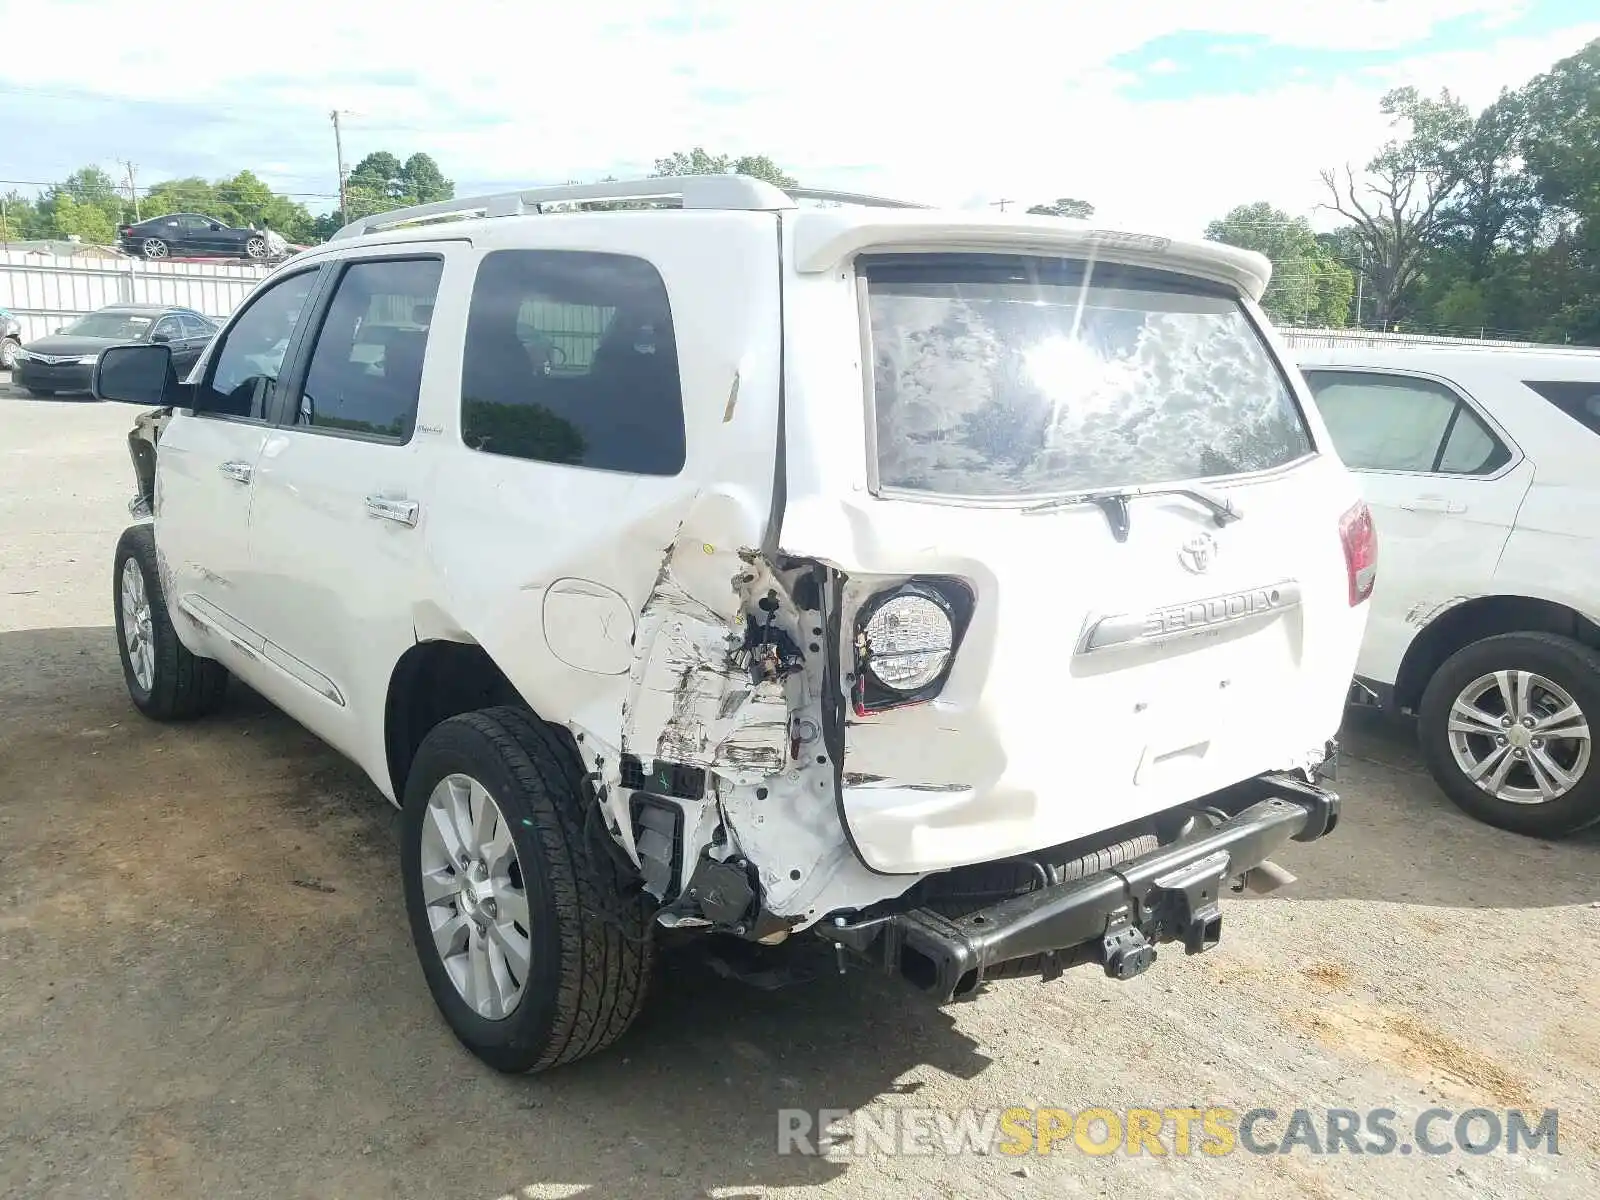 3 Photograph of a damaged car 5TDDY5G17KS170717 TOYOTA SEQUOIA 2019